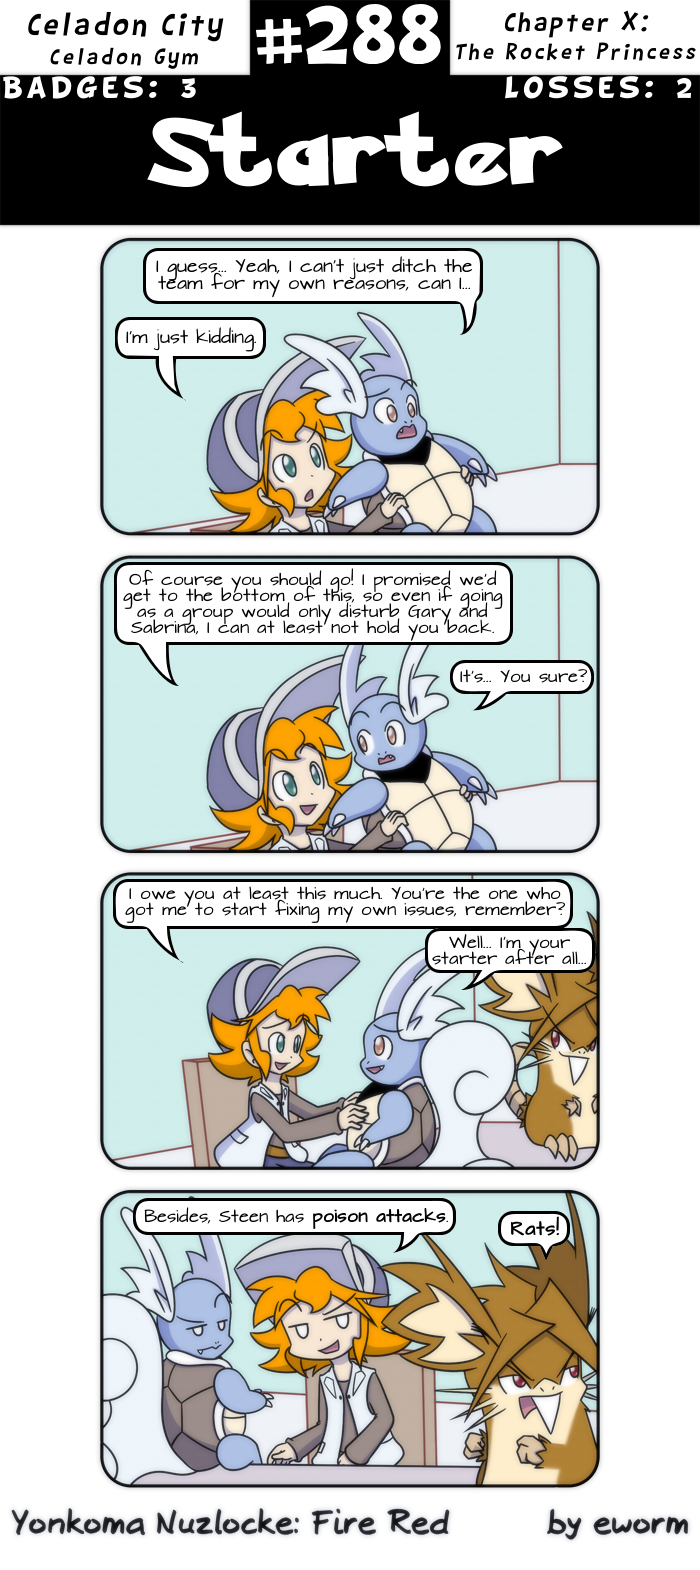 Strip #288... is titled "Starter". Imagine if it really took this long to get the first mon.